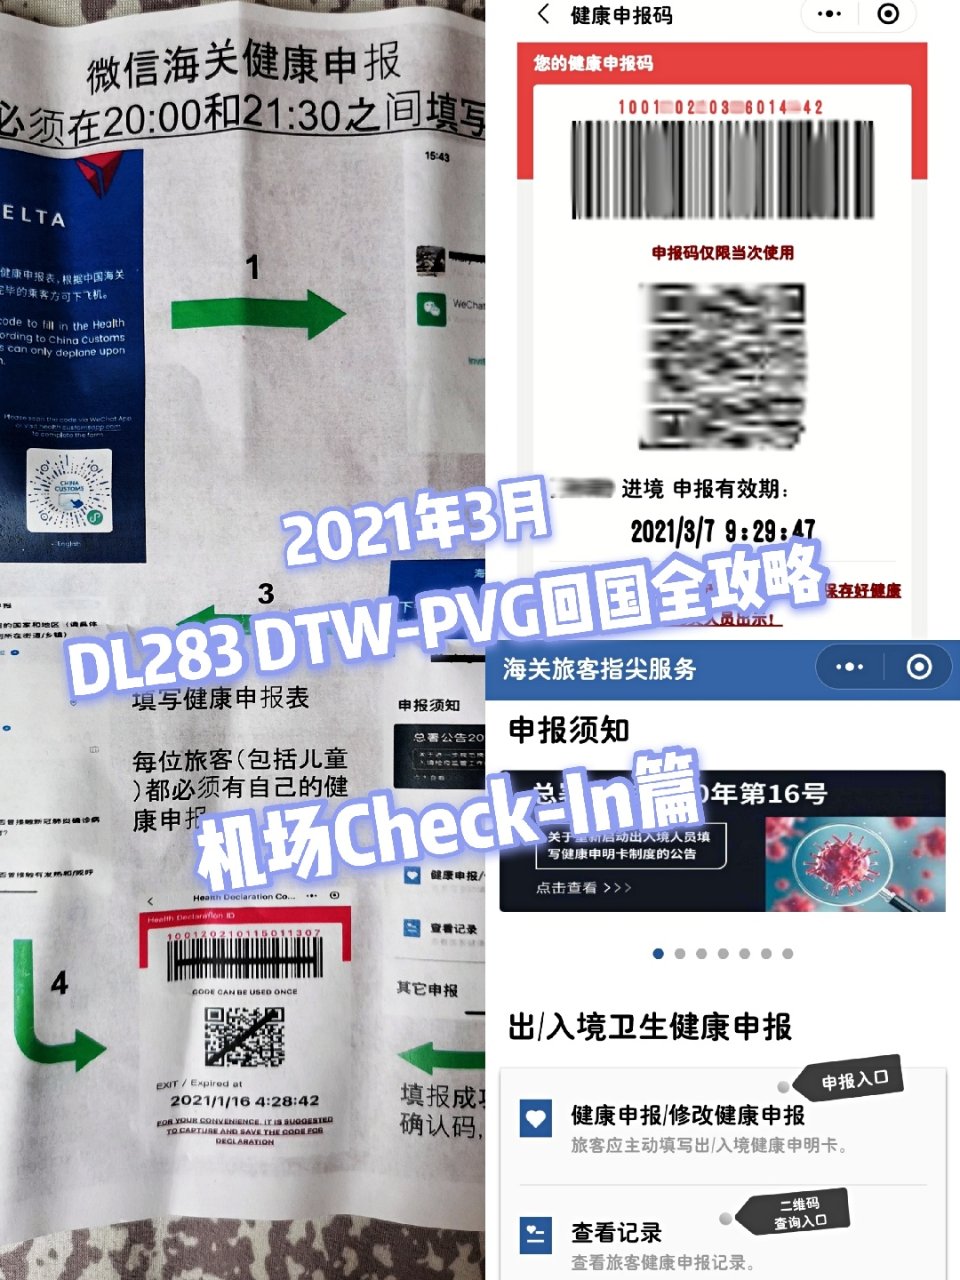 DL283 DTW - PVG 最新政策...